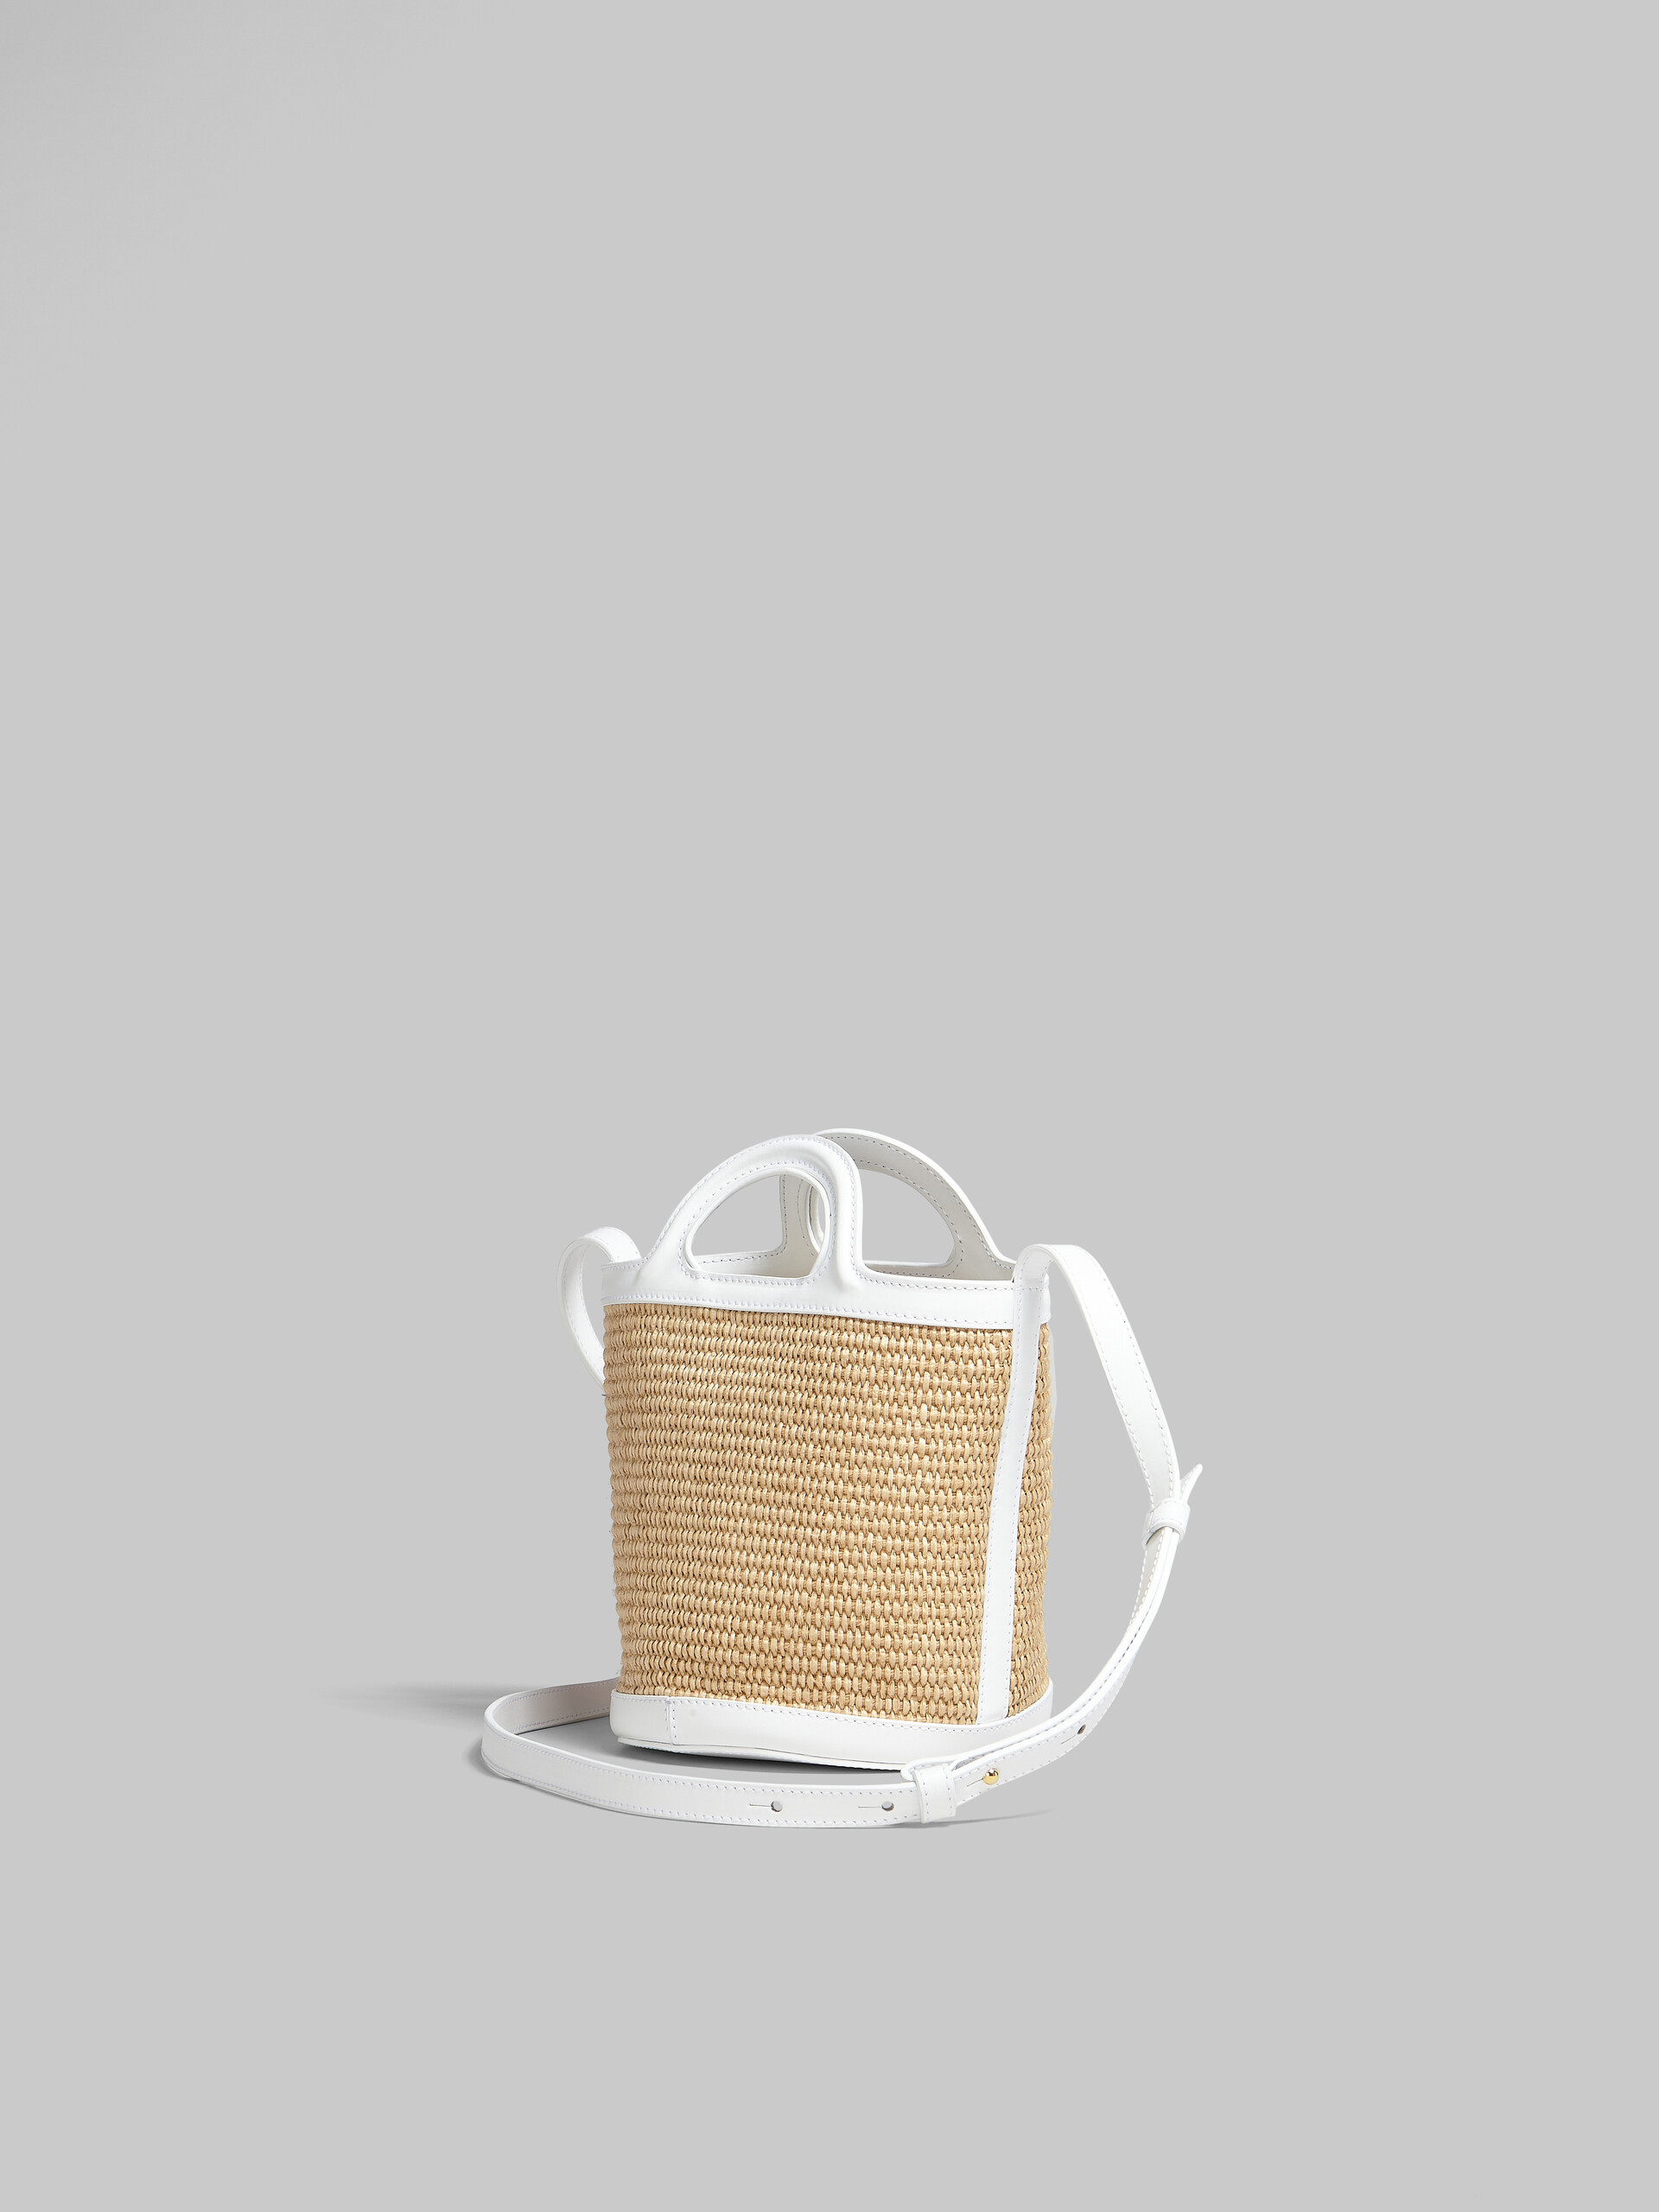 Tropicalia Small Bucket Bag in brown leather and raffia-effect fabric - Shoulder Bag - Image 3